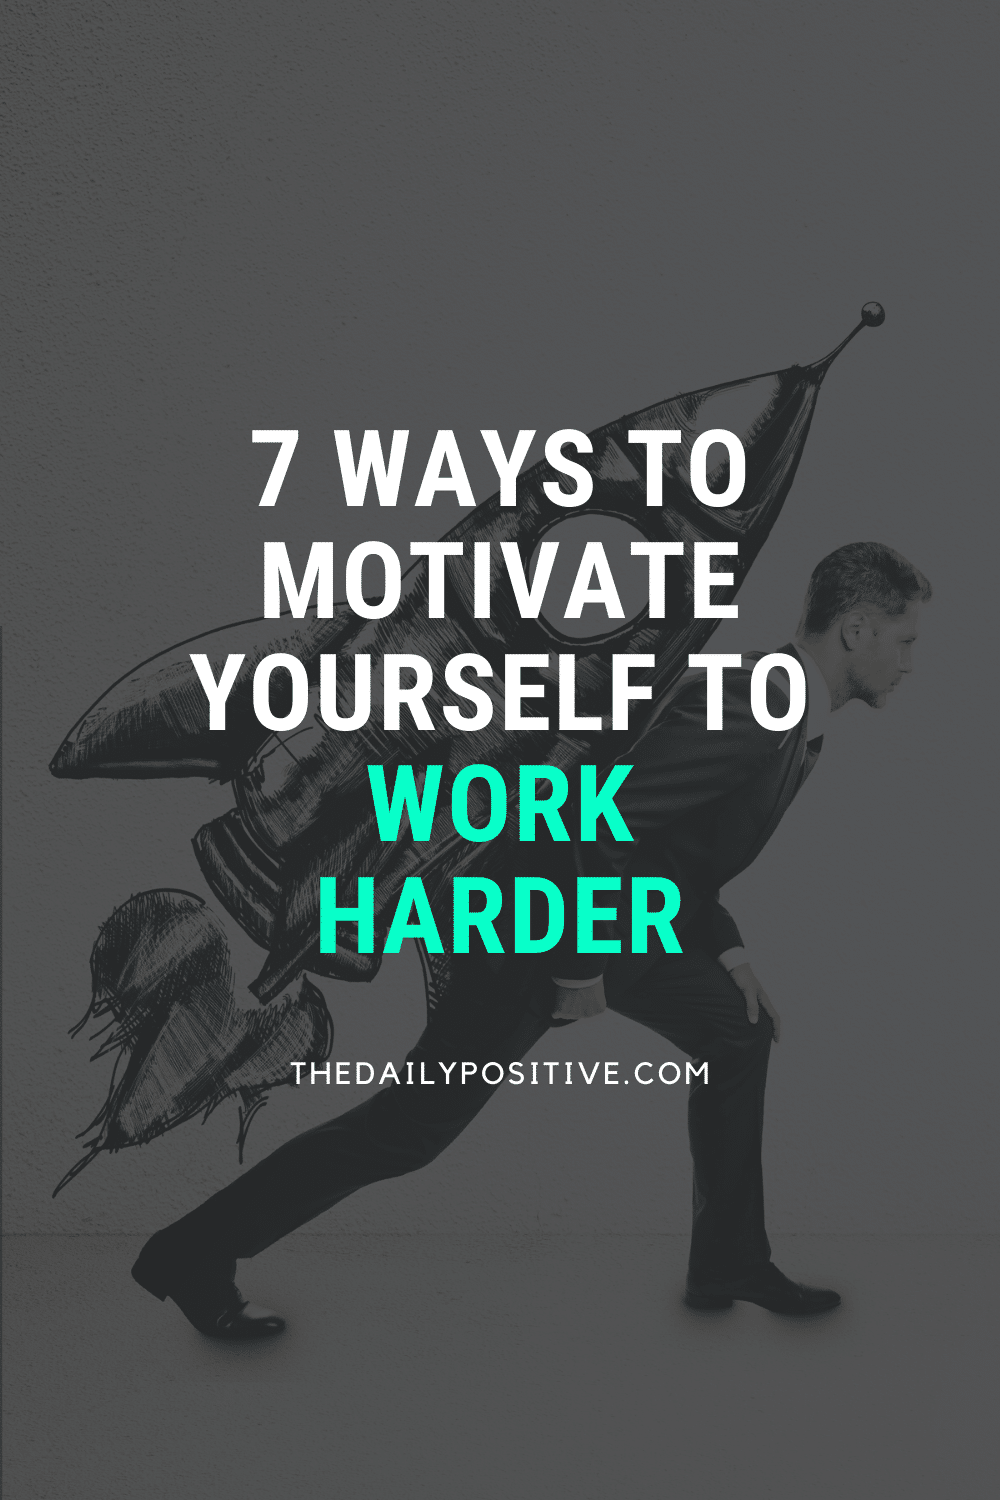 7 Ways To Motivate Yourself To Work Harder